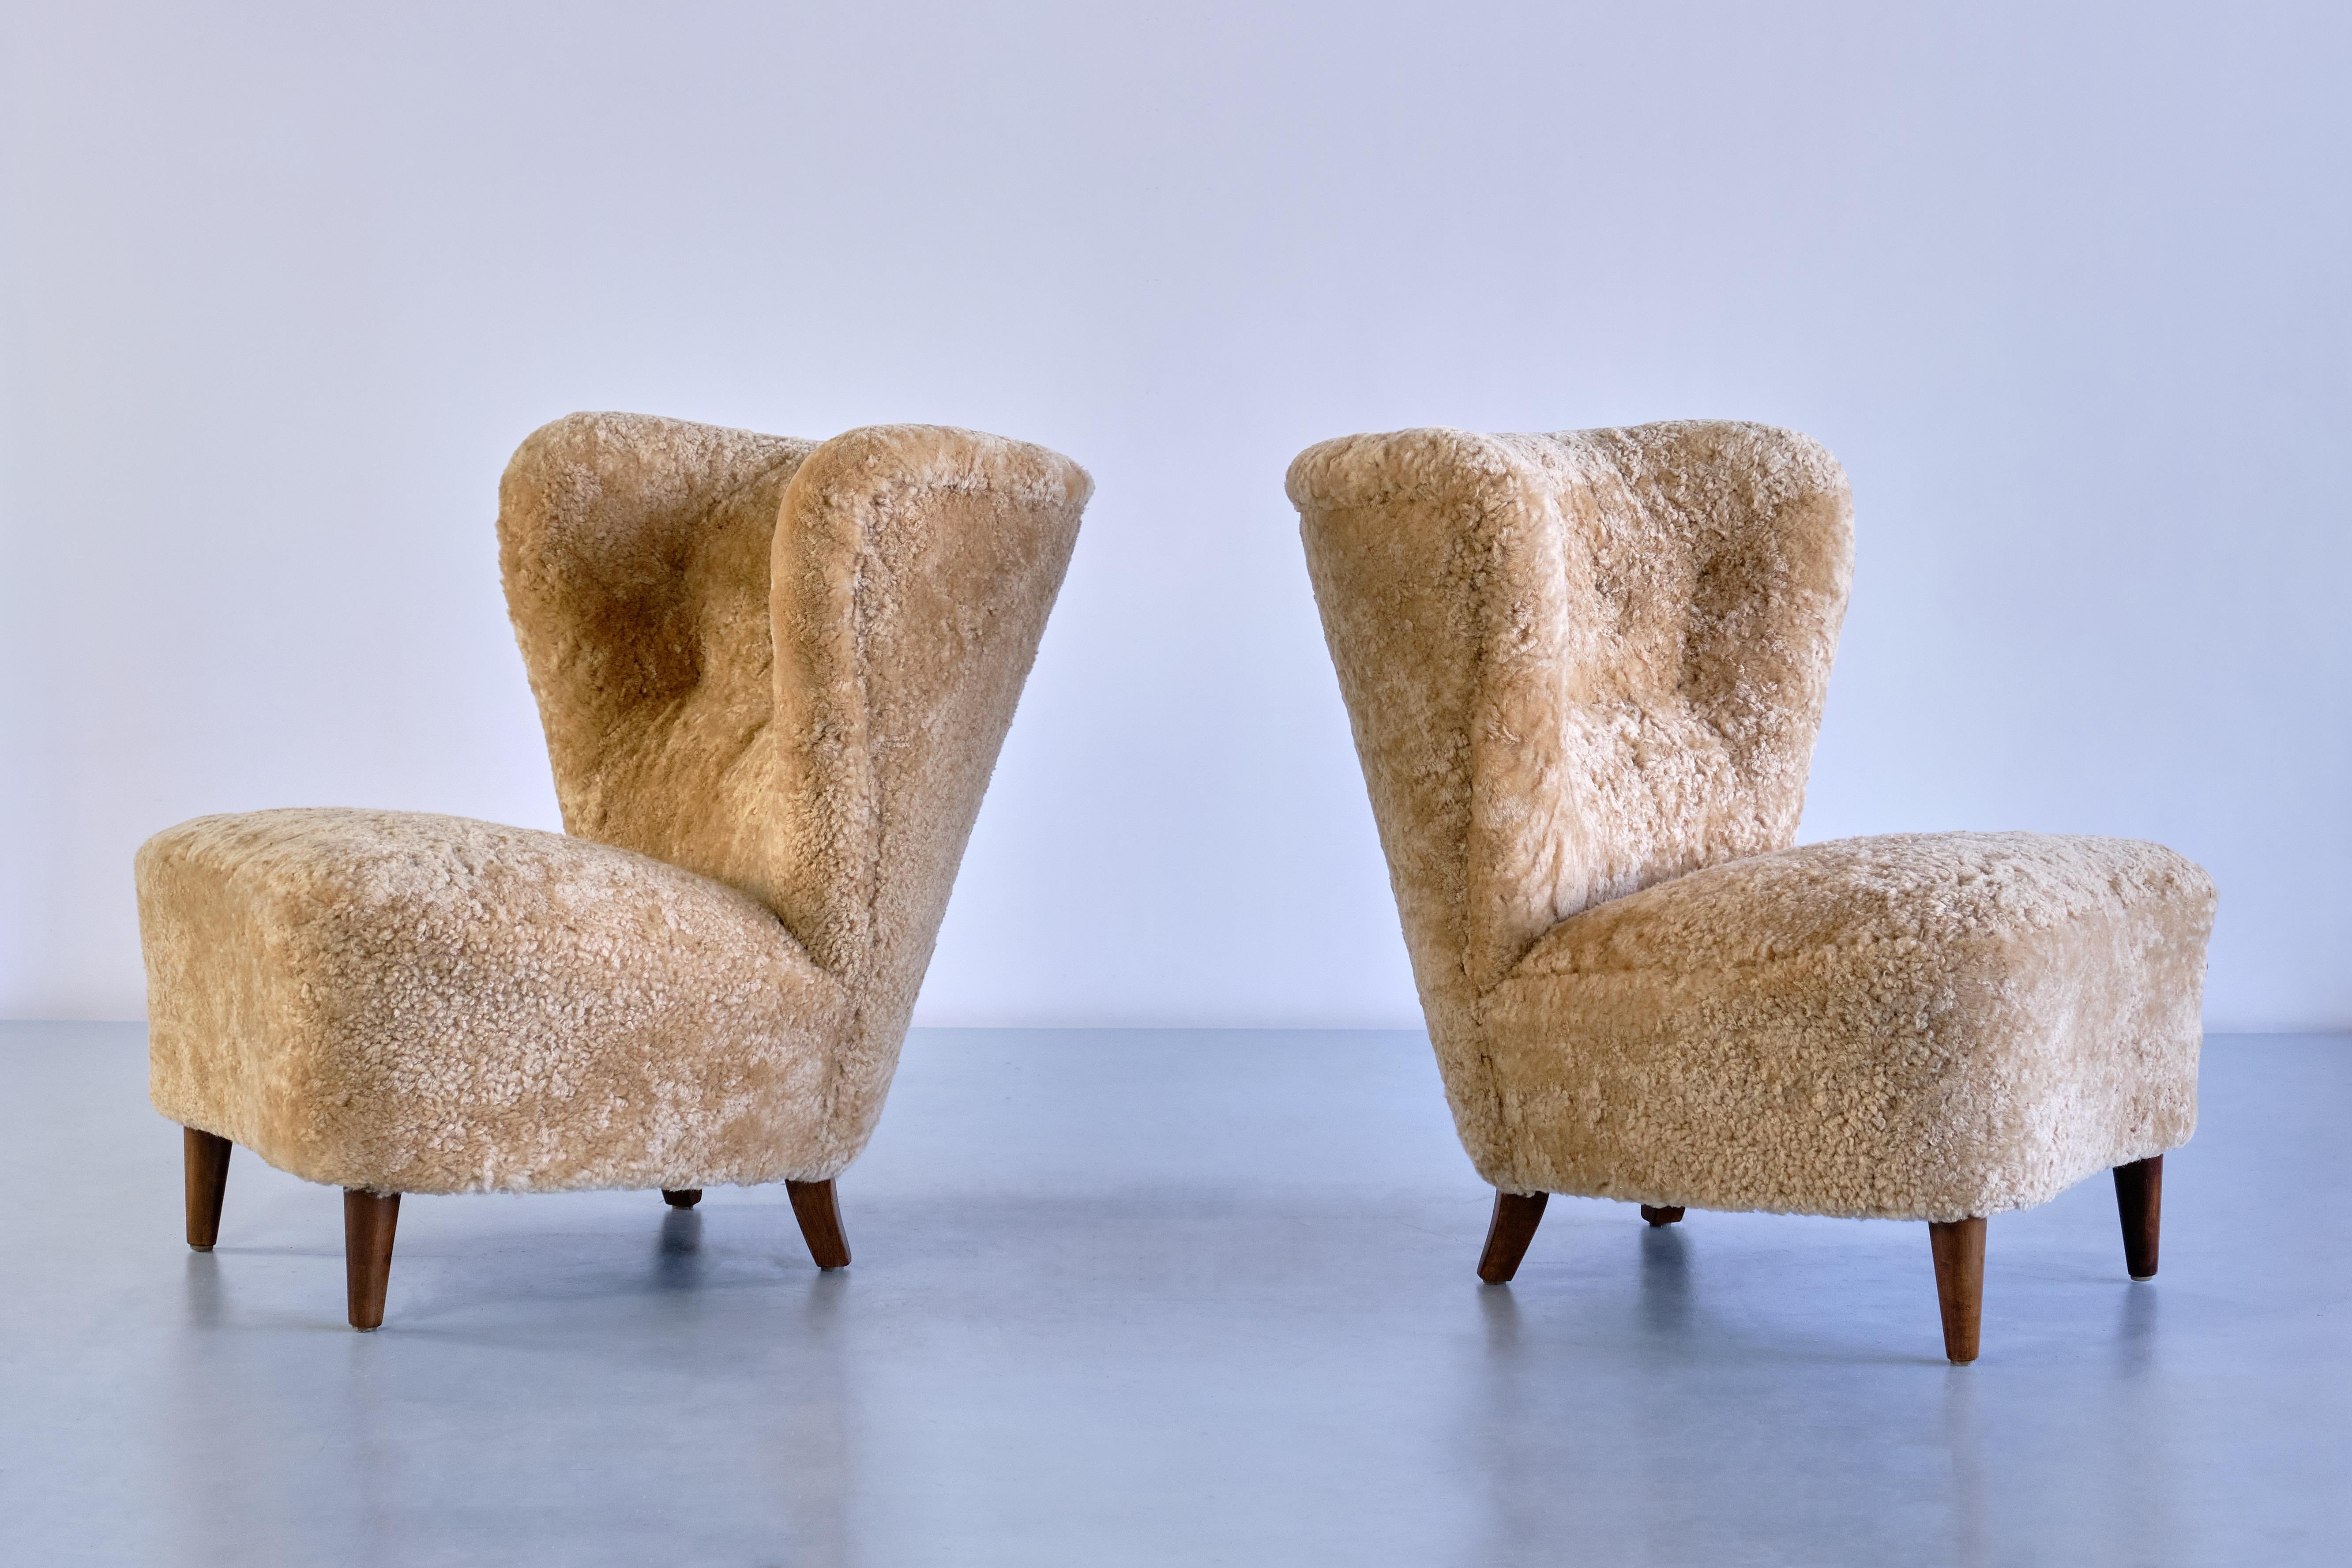 Pair of Johannes Brynte Lounge Chairs in Sheepskin and Ash Wood, Sweden, 1940s For Sale 10